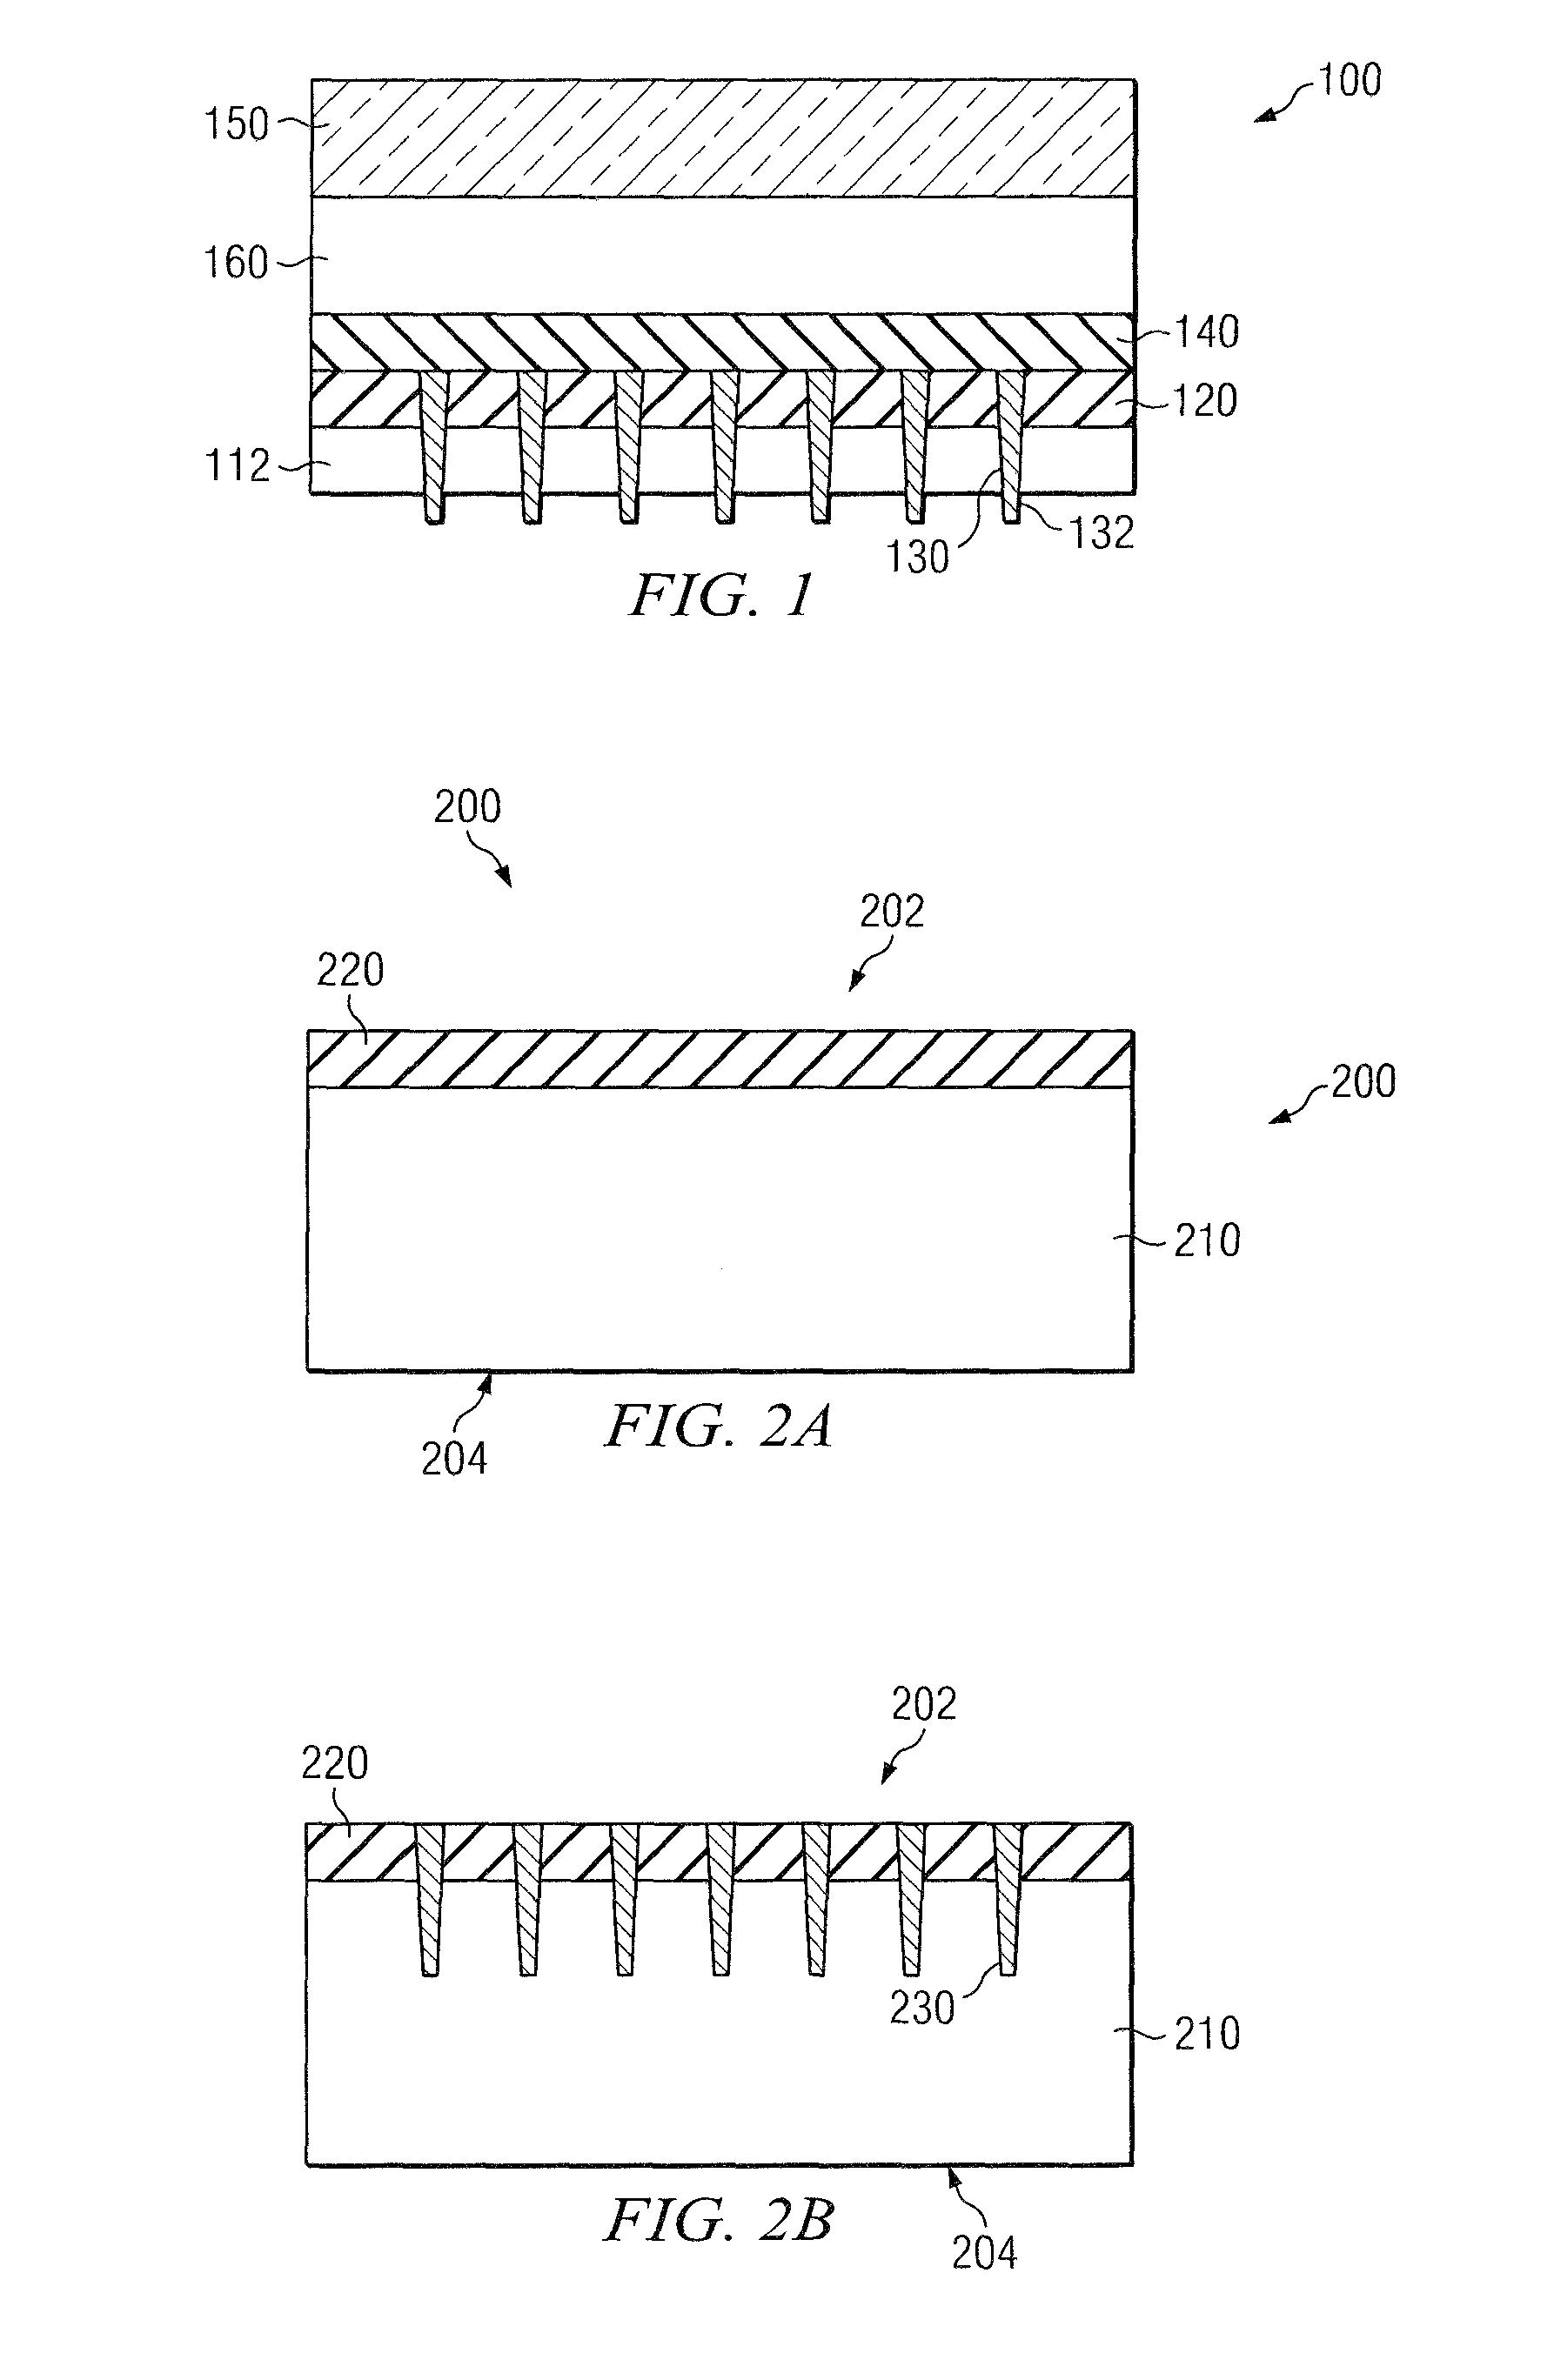 Double wafer carrier process for creating integrated circuit die with through-silicon vias and micro-electro-mechanical systems protected by a hermetic cavity created at the wafer level